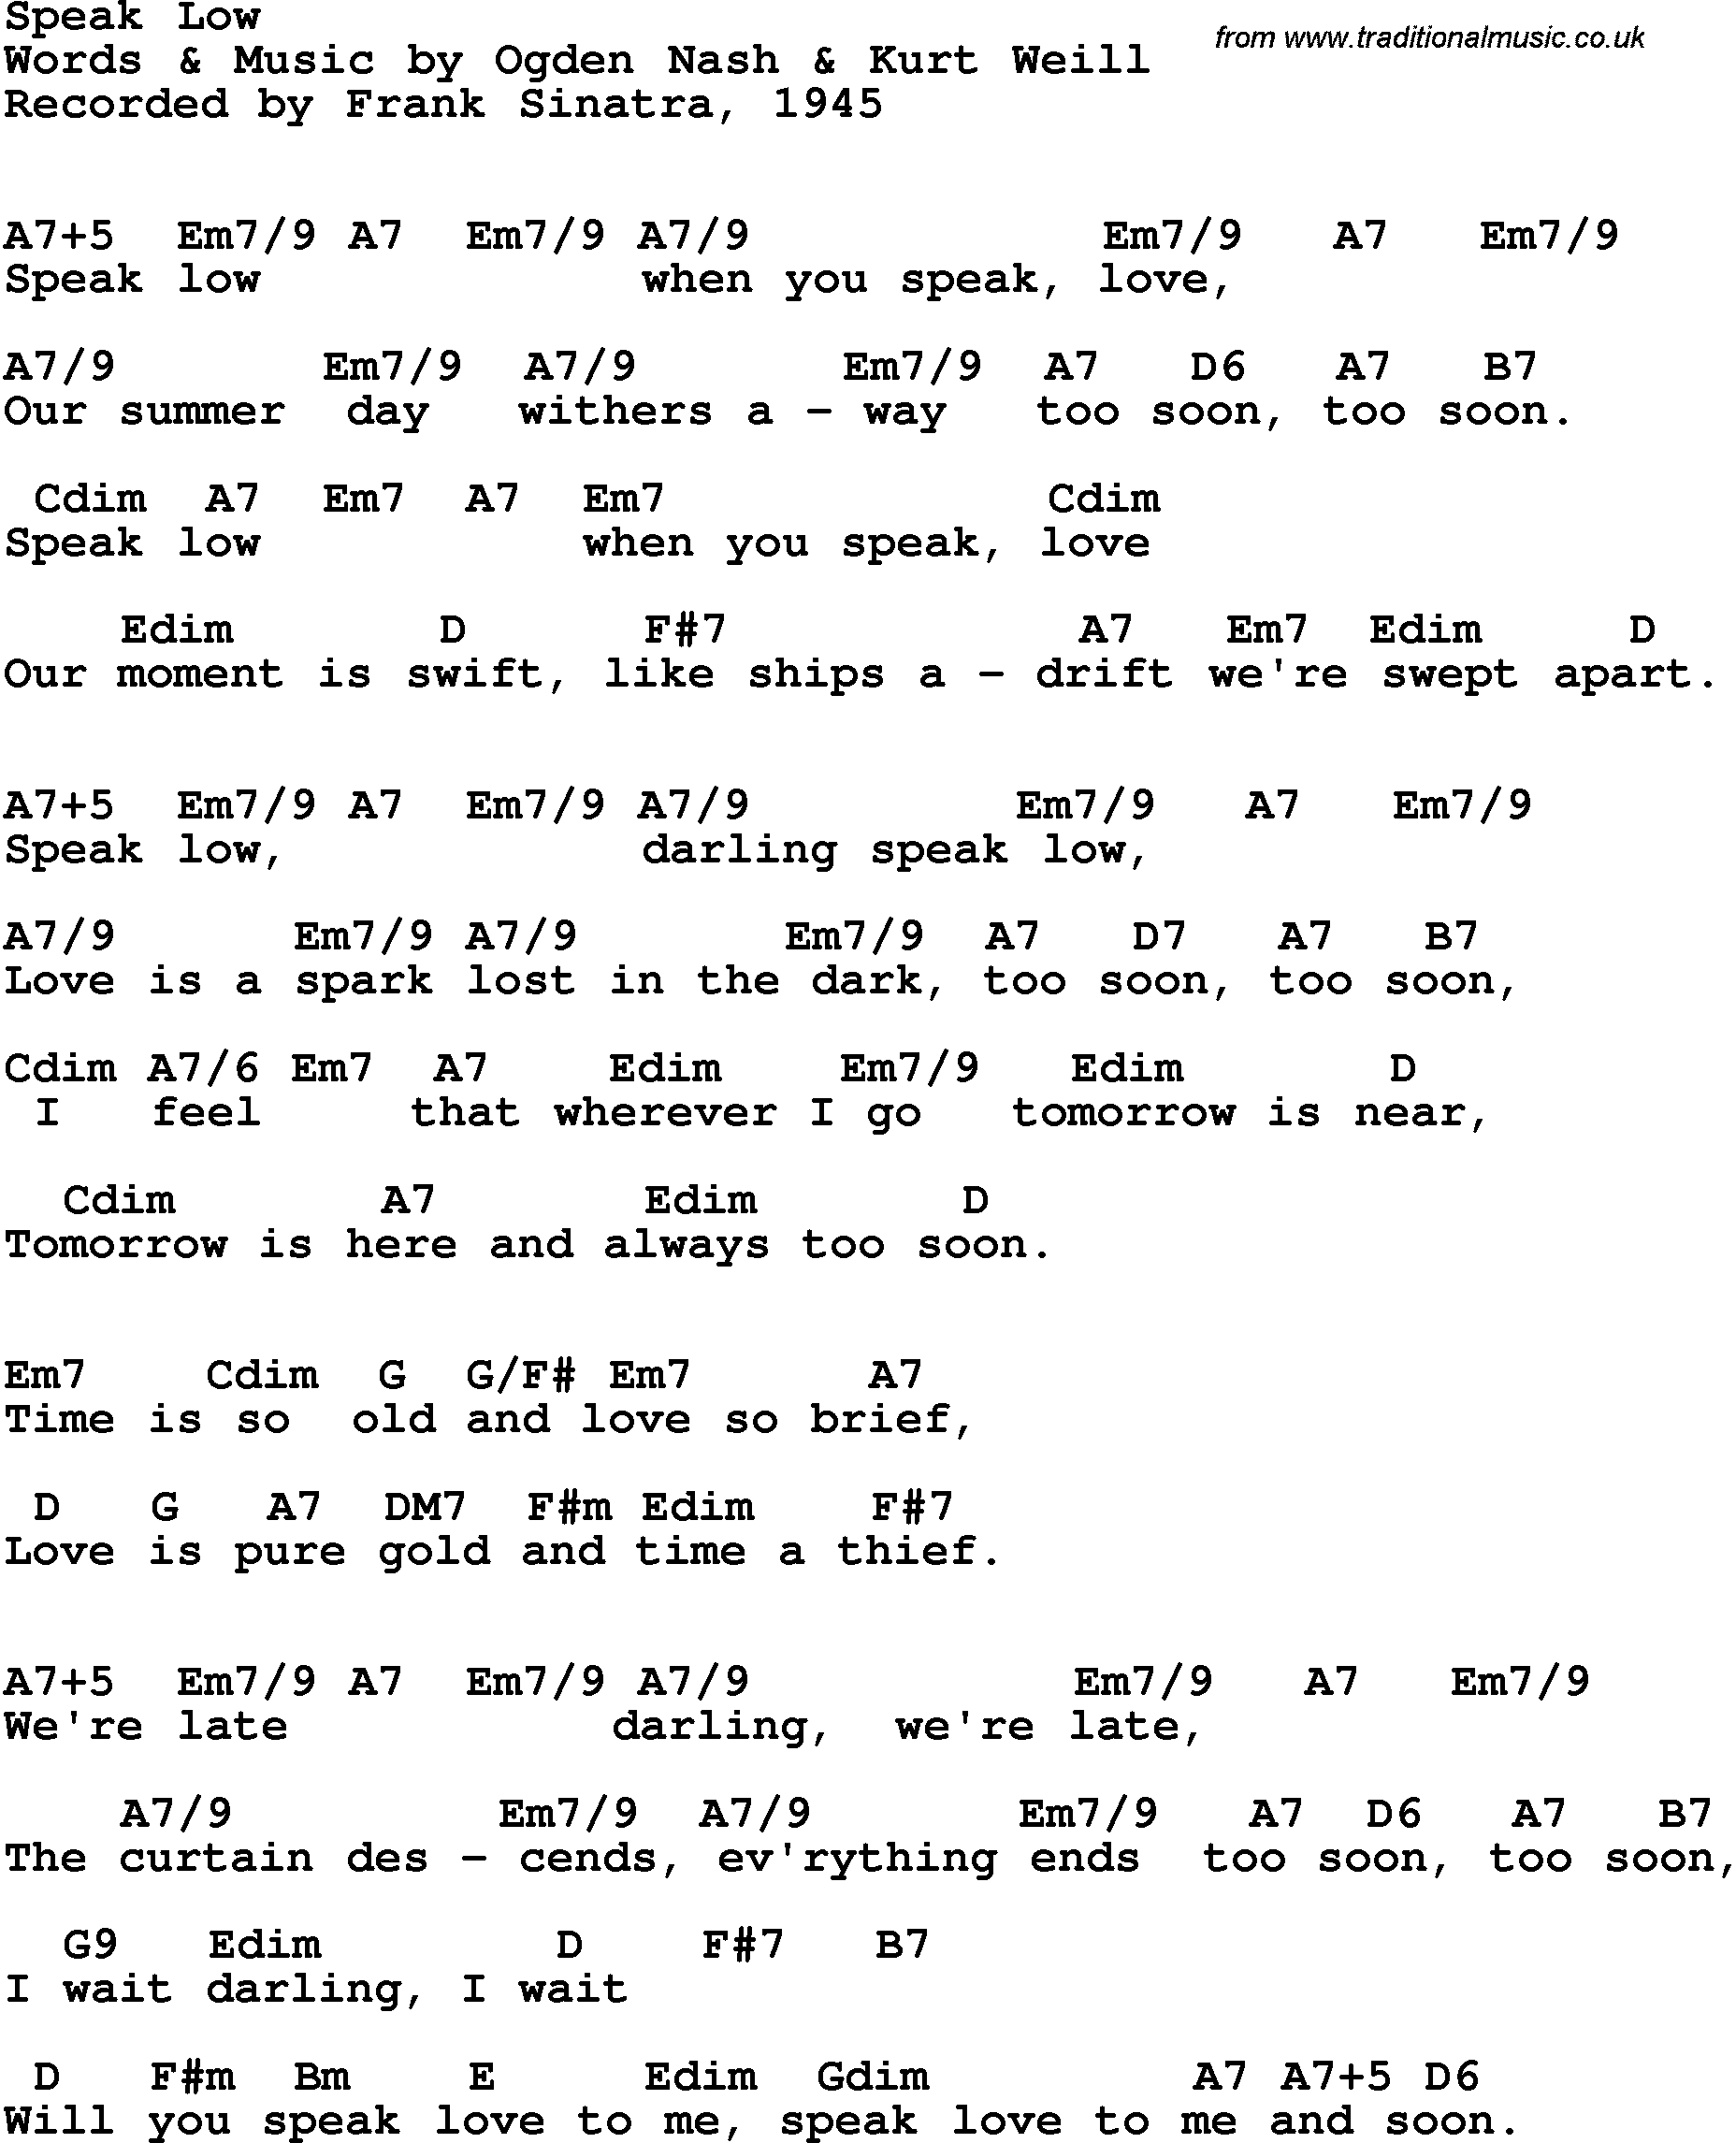 Song Lyrics with guitar chords for Speak Low - Frank Sinatra, 1945